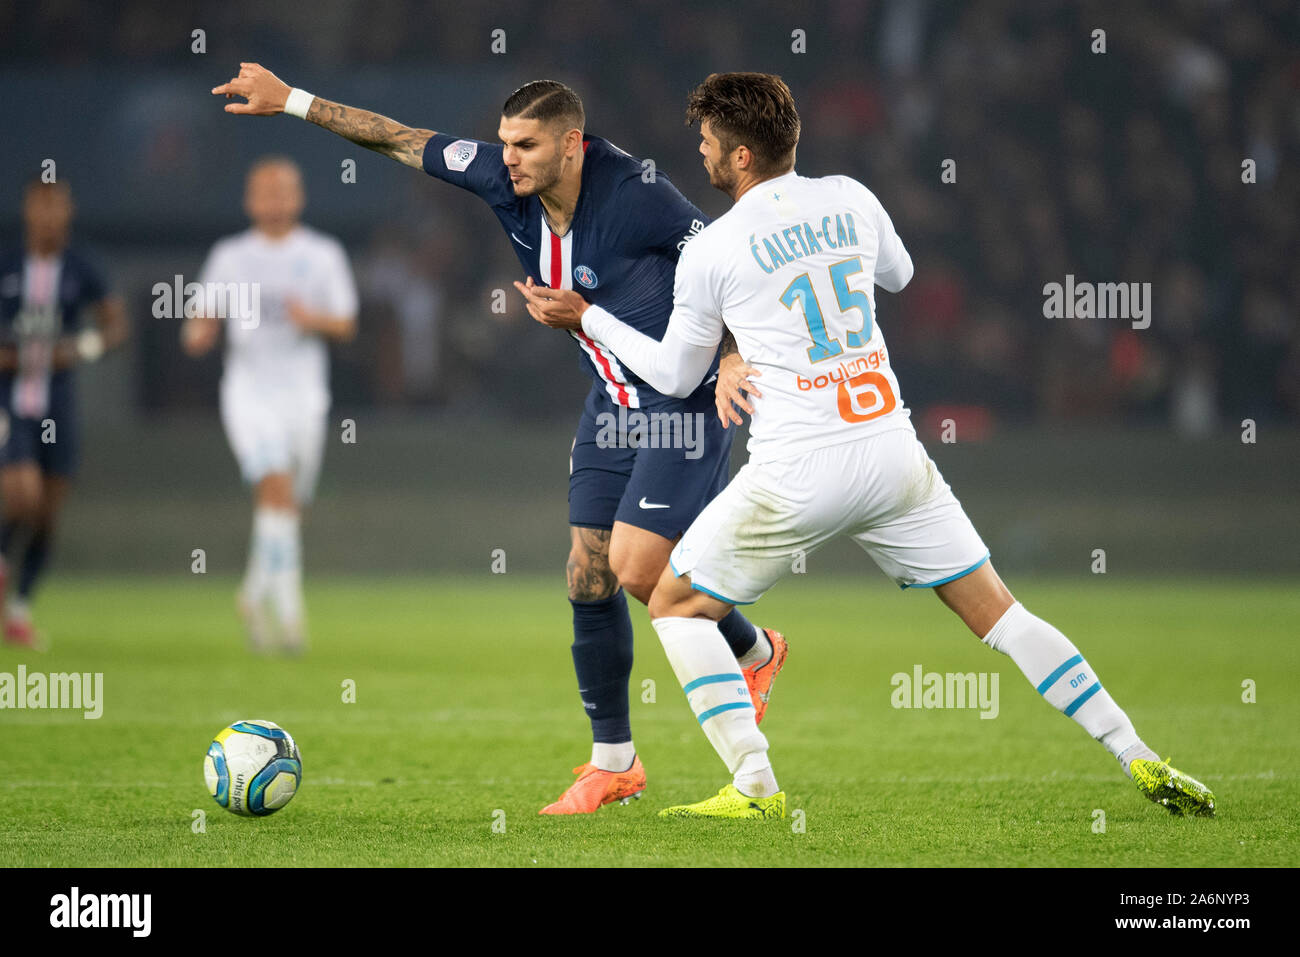 Paris, France. 27th Oct, 2019. Mauro Icardi (front L) of Paris Saint-Germain vies with Duje Caleta-Car of Olympique of Marseille during the Ligue 1 match at the Parc des Princes in Paris, France on Oct. 27, 2019. Credit: Jack Chan/Xinhua/Alamy Live News Stock Photo